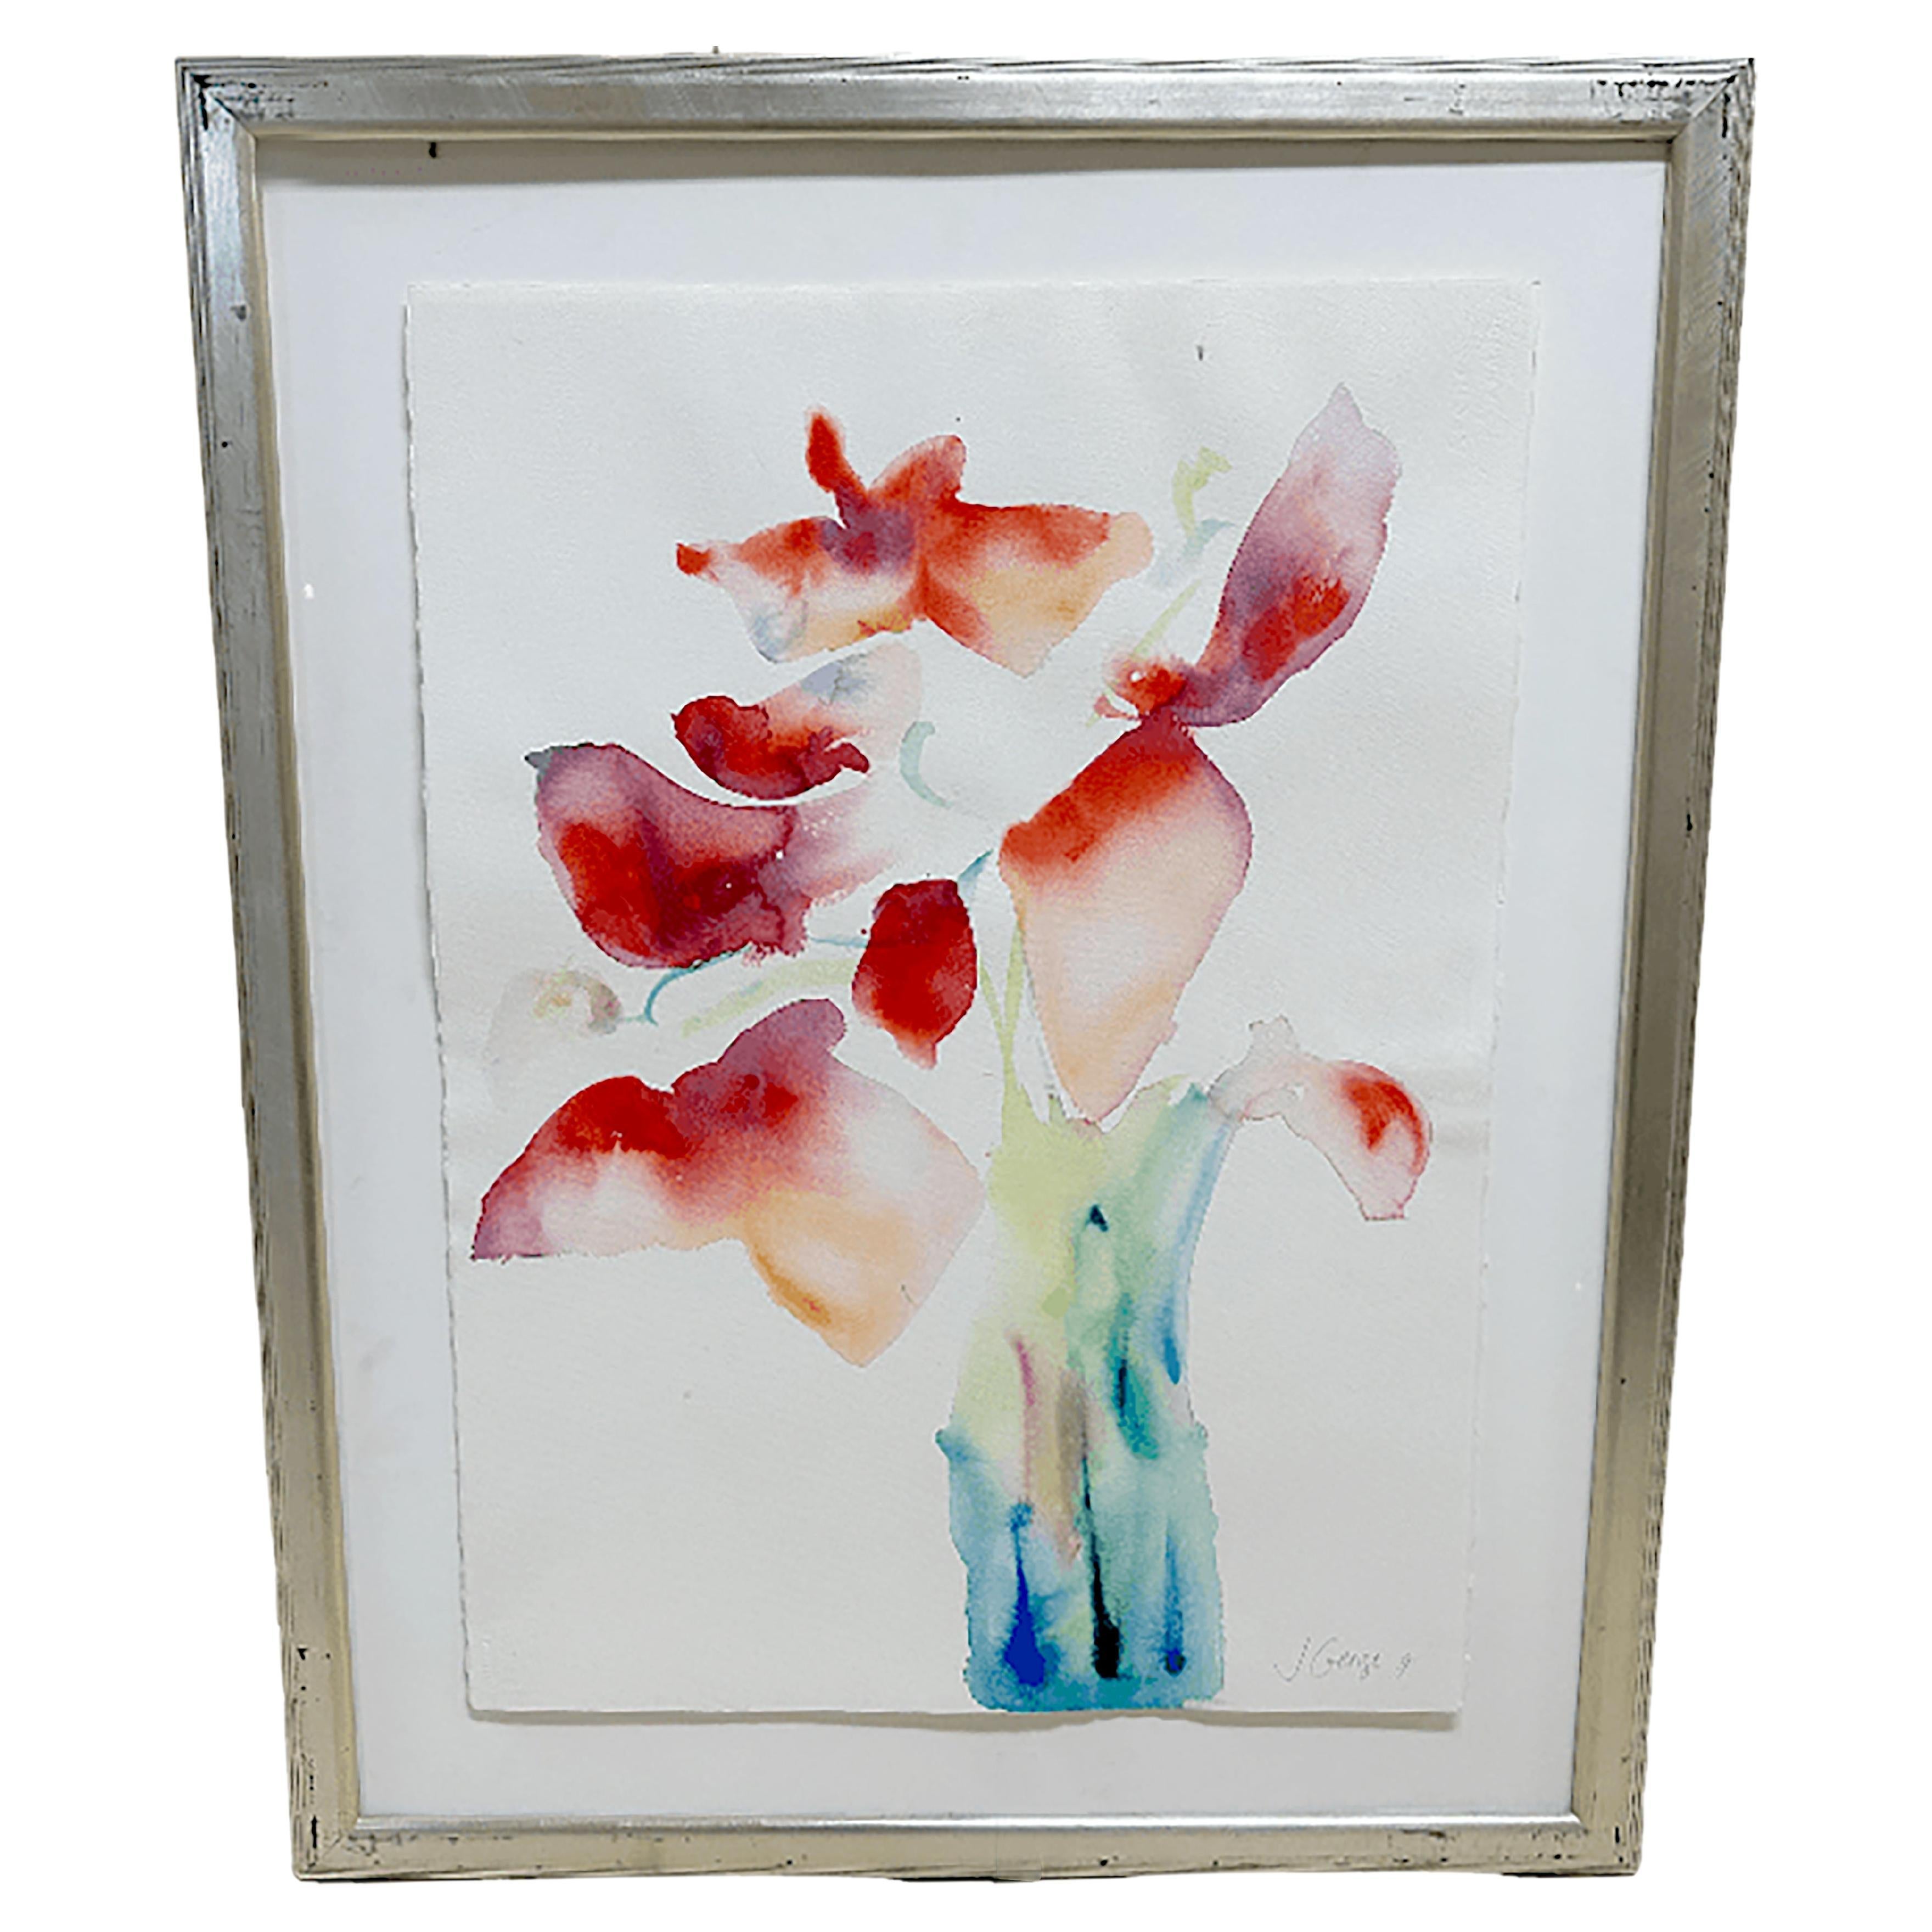 Elegantly Framed Watercolor Painting by Artist J. George For Sale